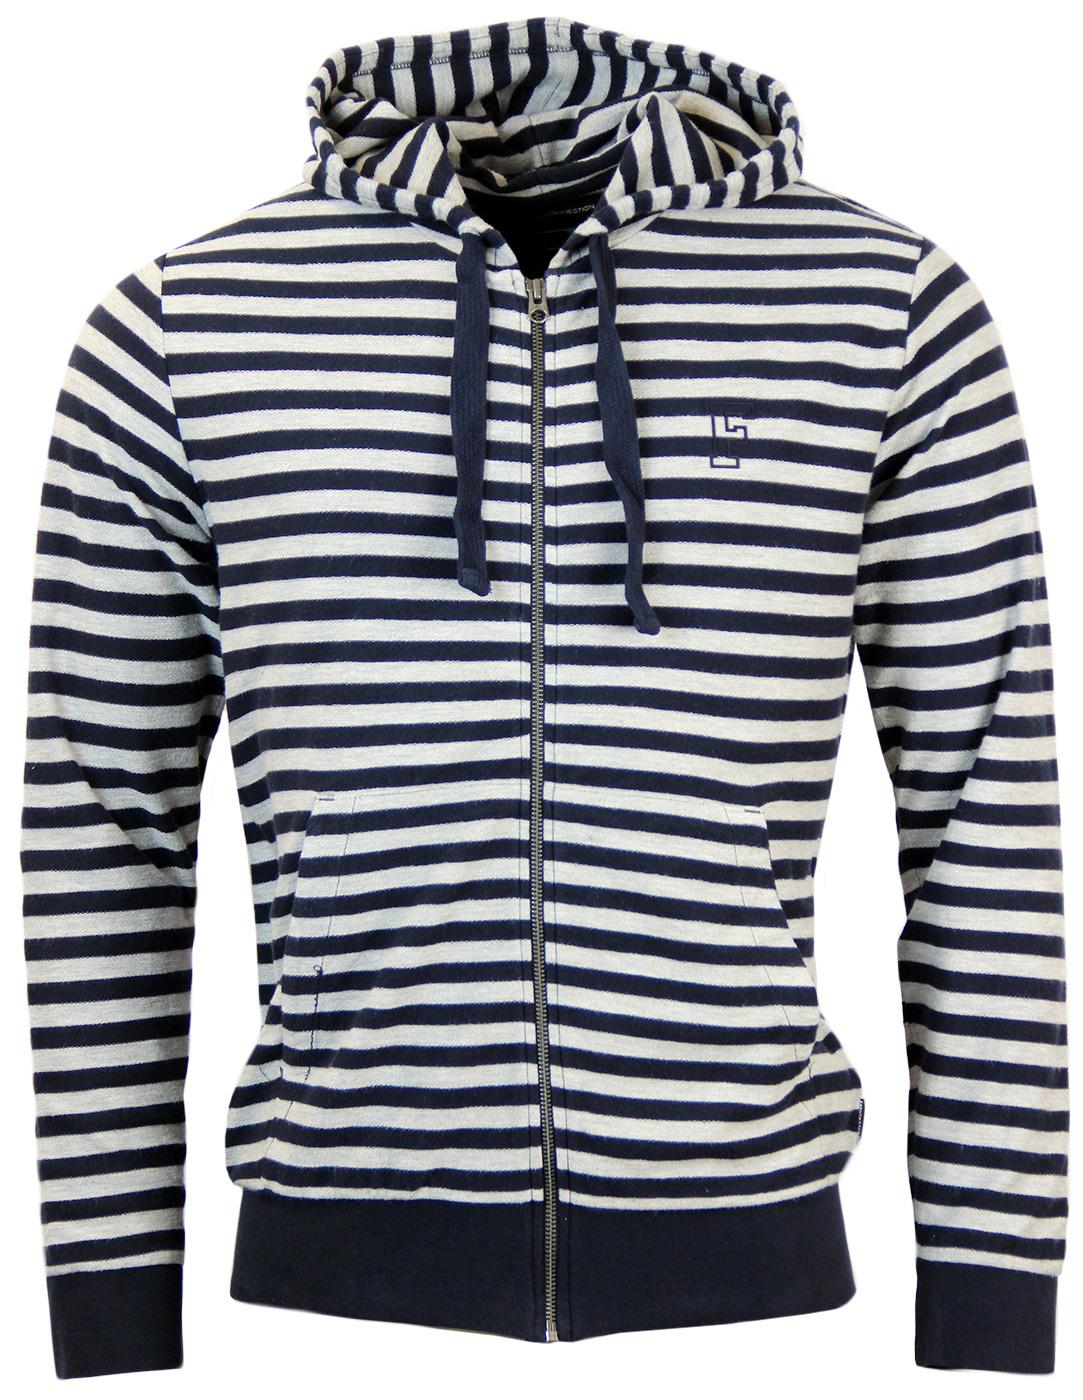 FRENCH CONNECTION Retro Indie Striped Hoodie in Grey/Blue